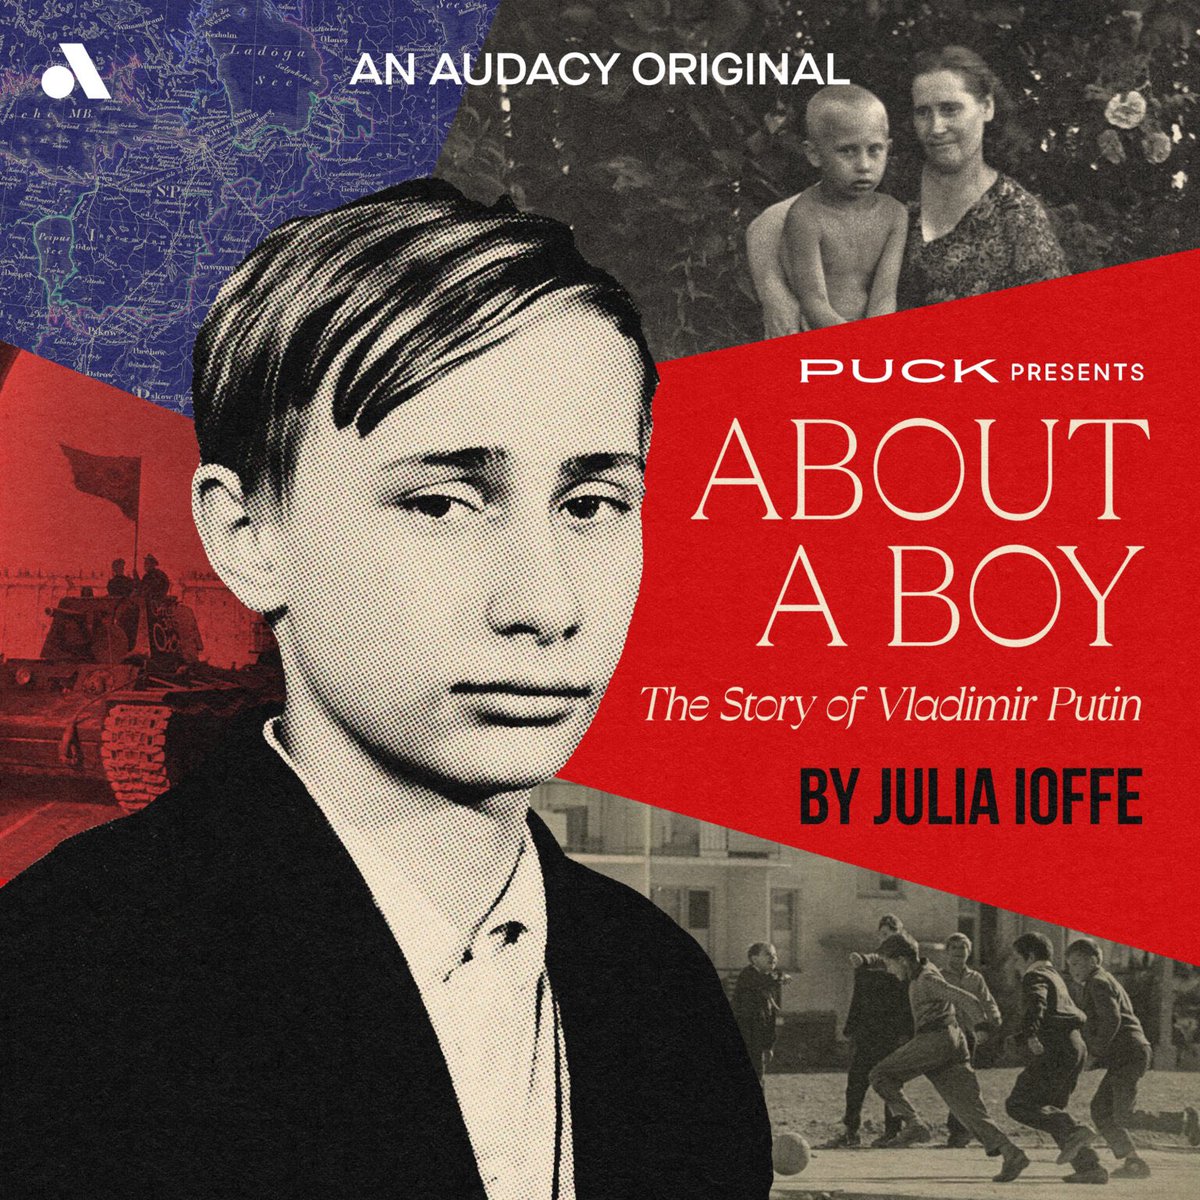 Highly recommend the podcast About a Boy. Russian-born American journalist @juliaioffe explores how Putin’s childhood taught him lessons that shape his thinking and actions to this day. It’s all about the “dvor”.